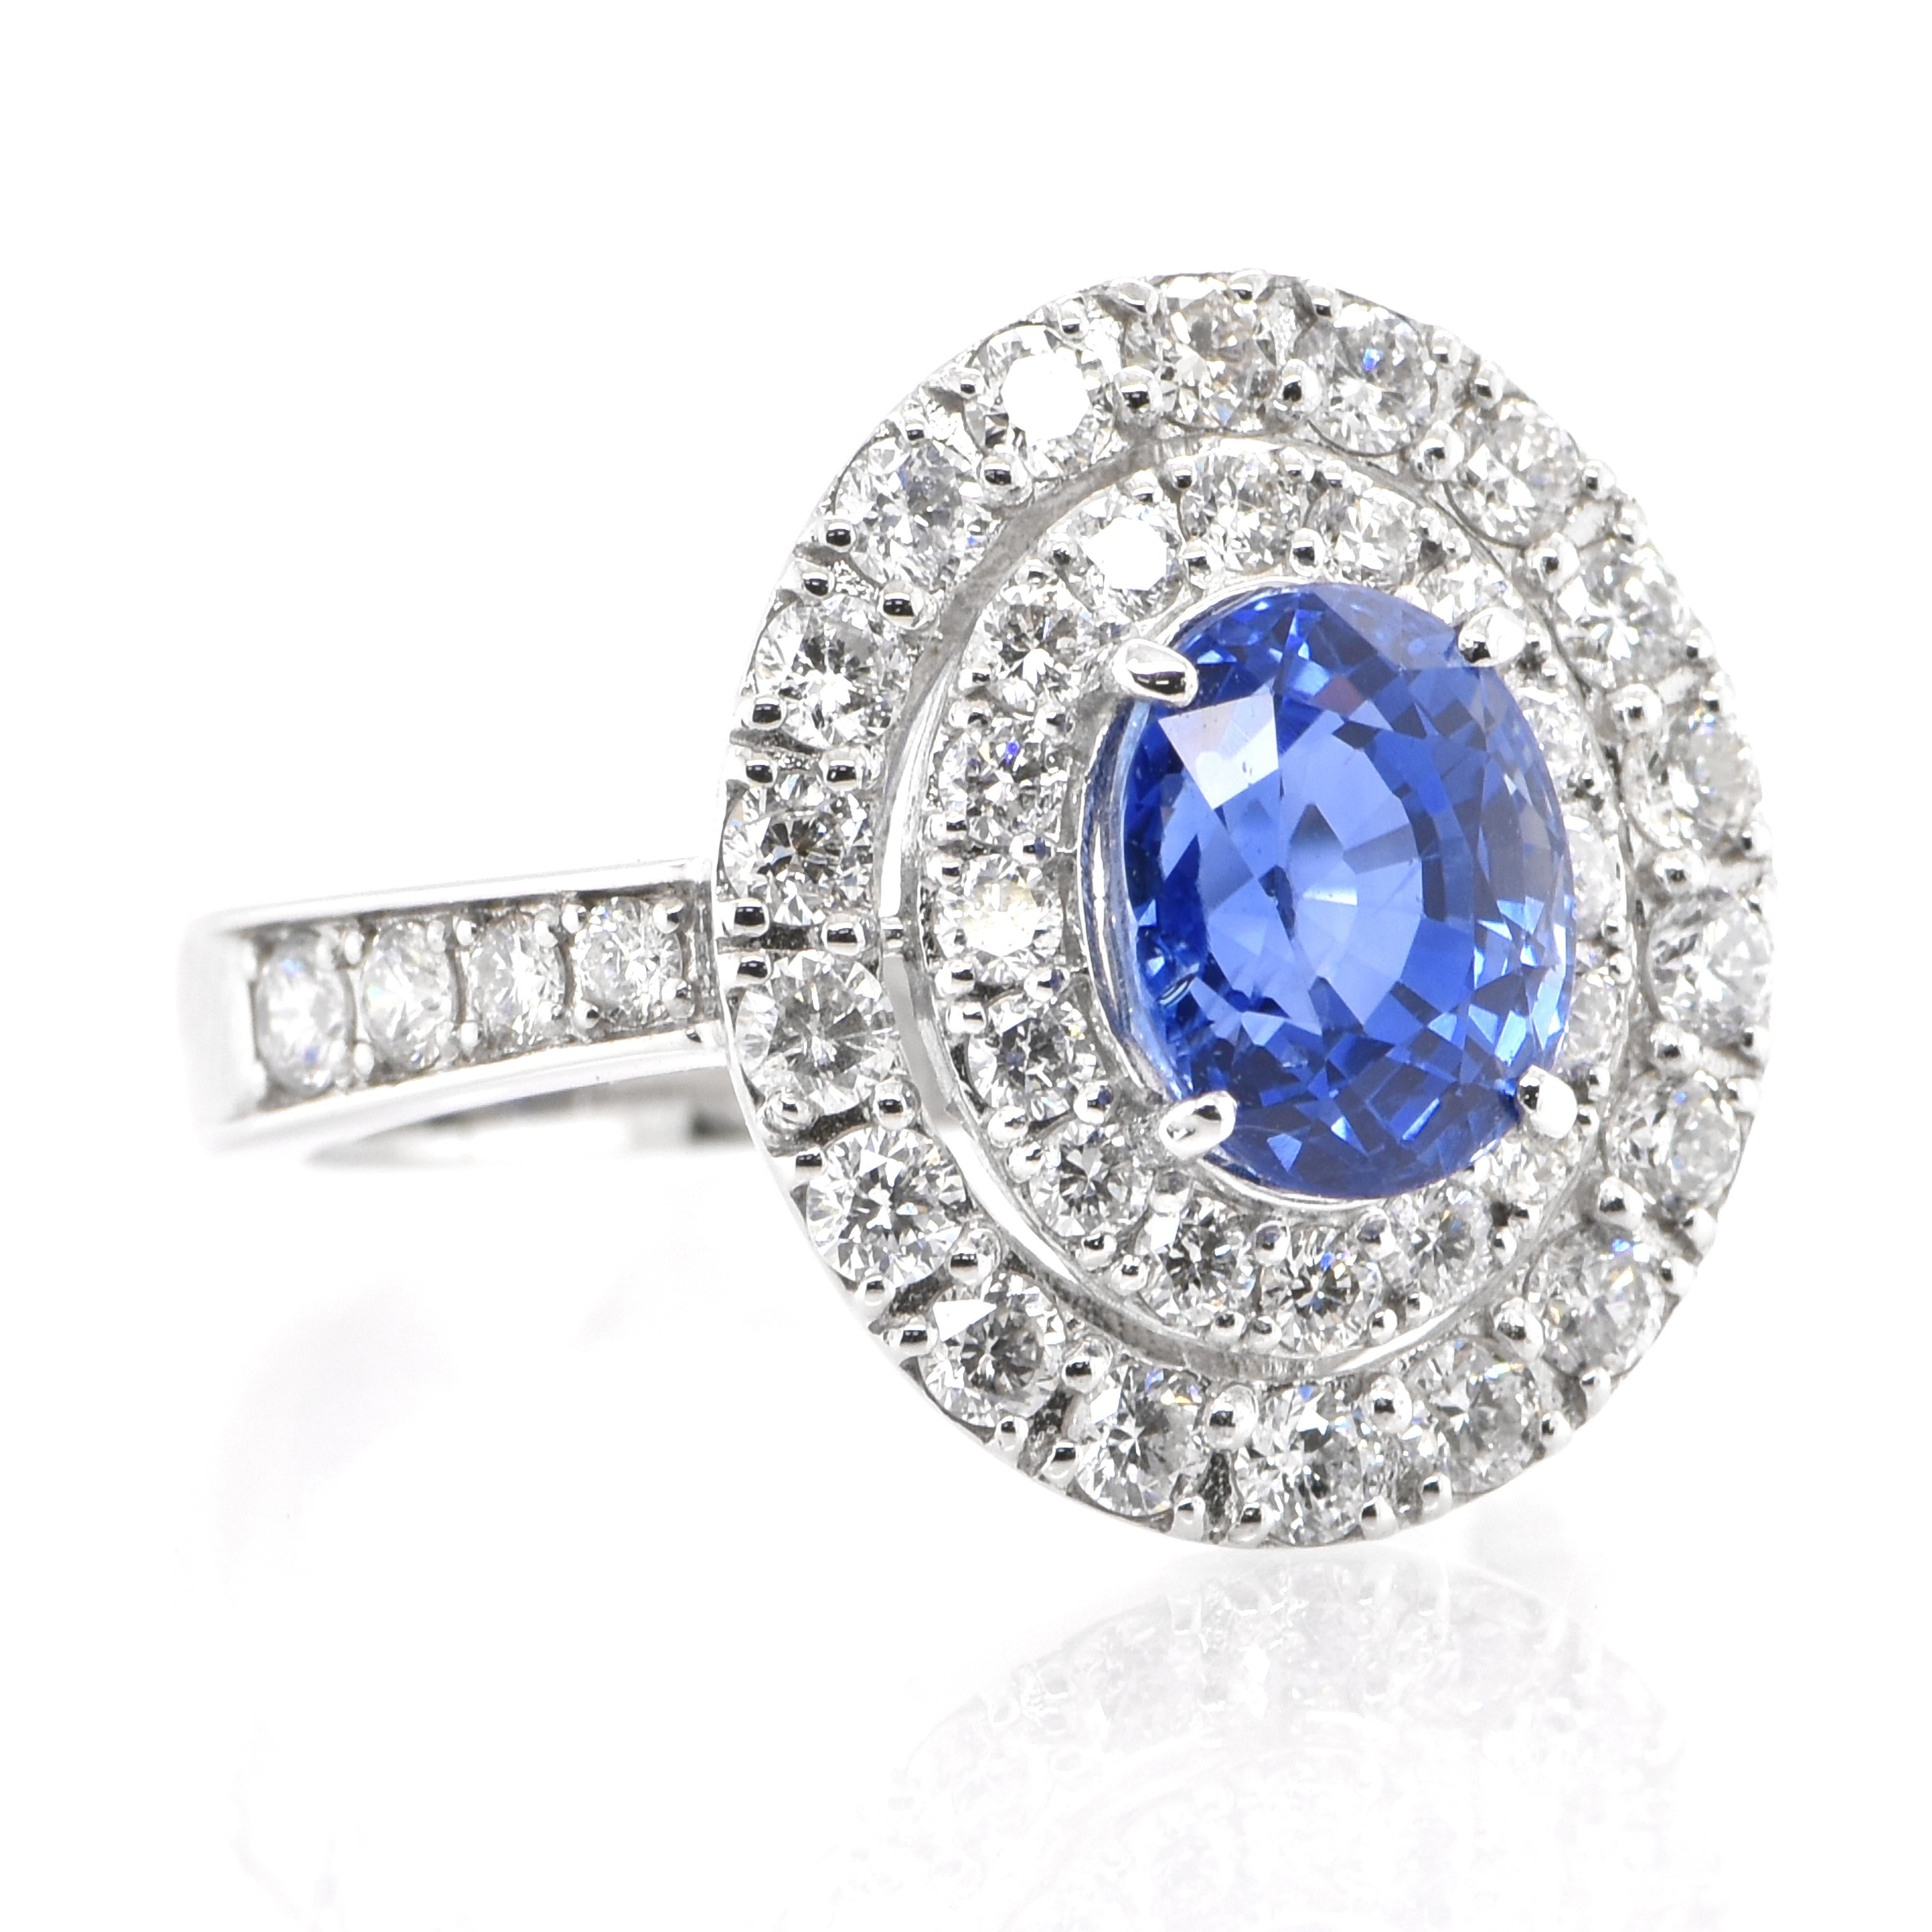 Modern 2.39 Carat Natural Blue Sapphire and Diamond Double Halo Ring Made in Platinum